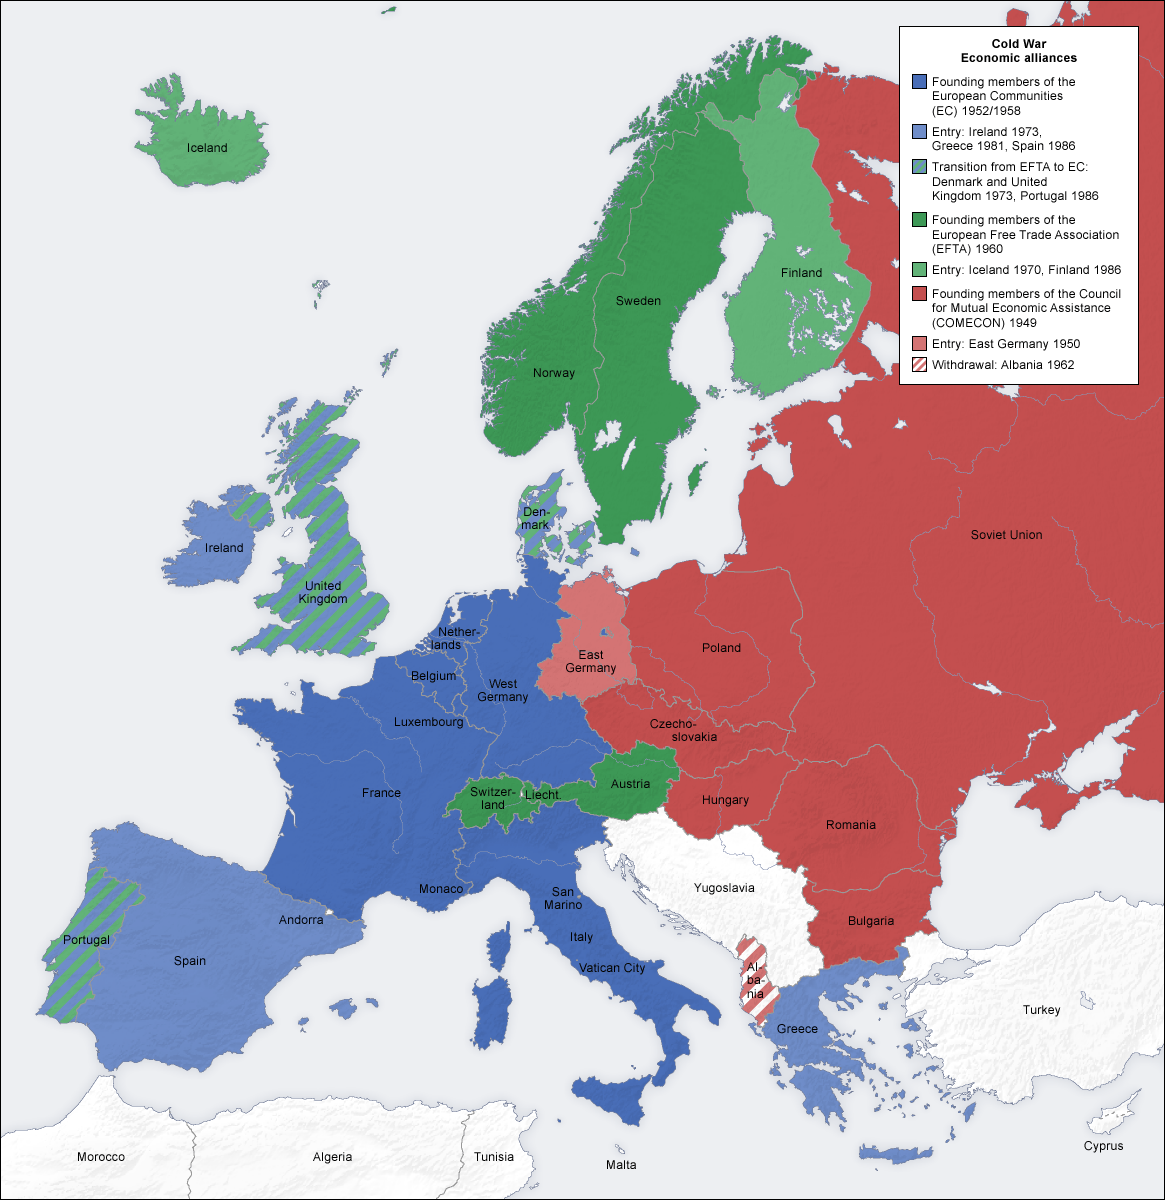 Europe in the 'Cold War'.